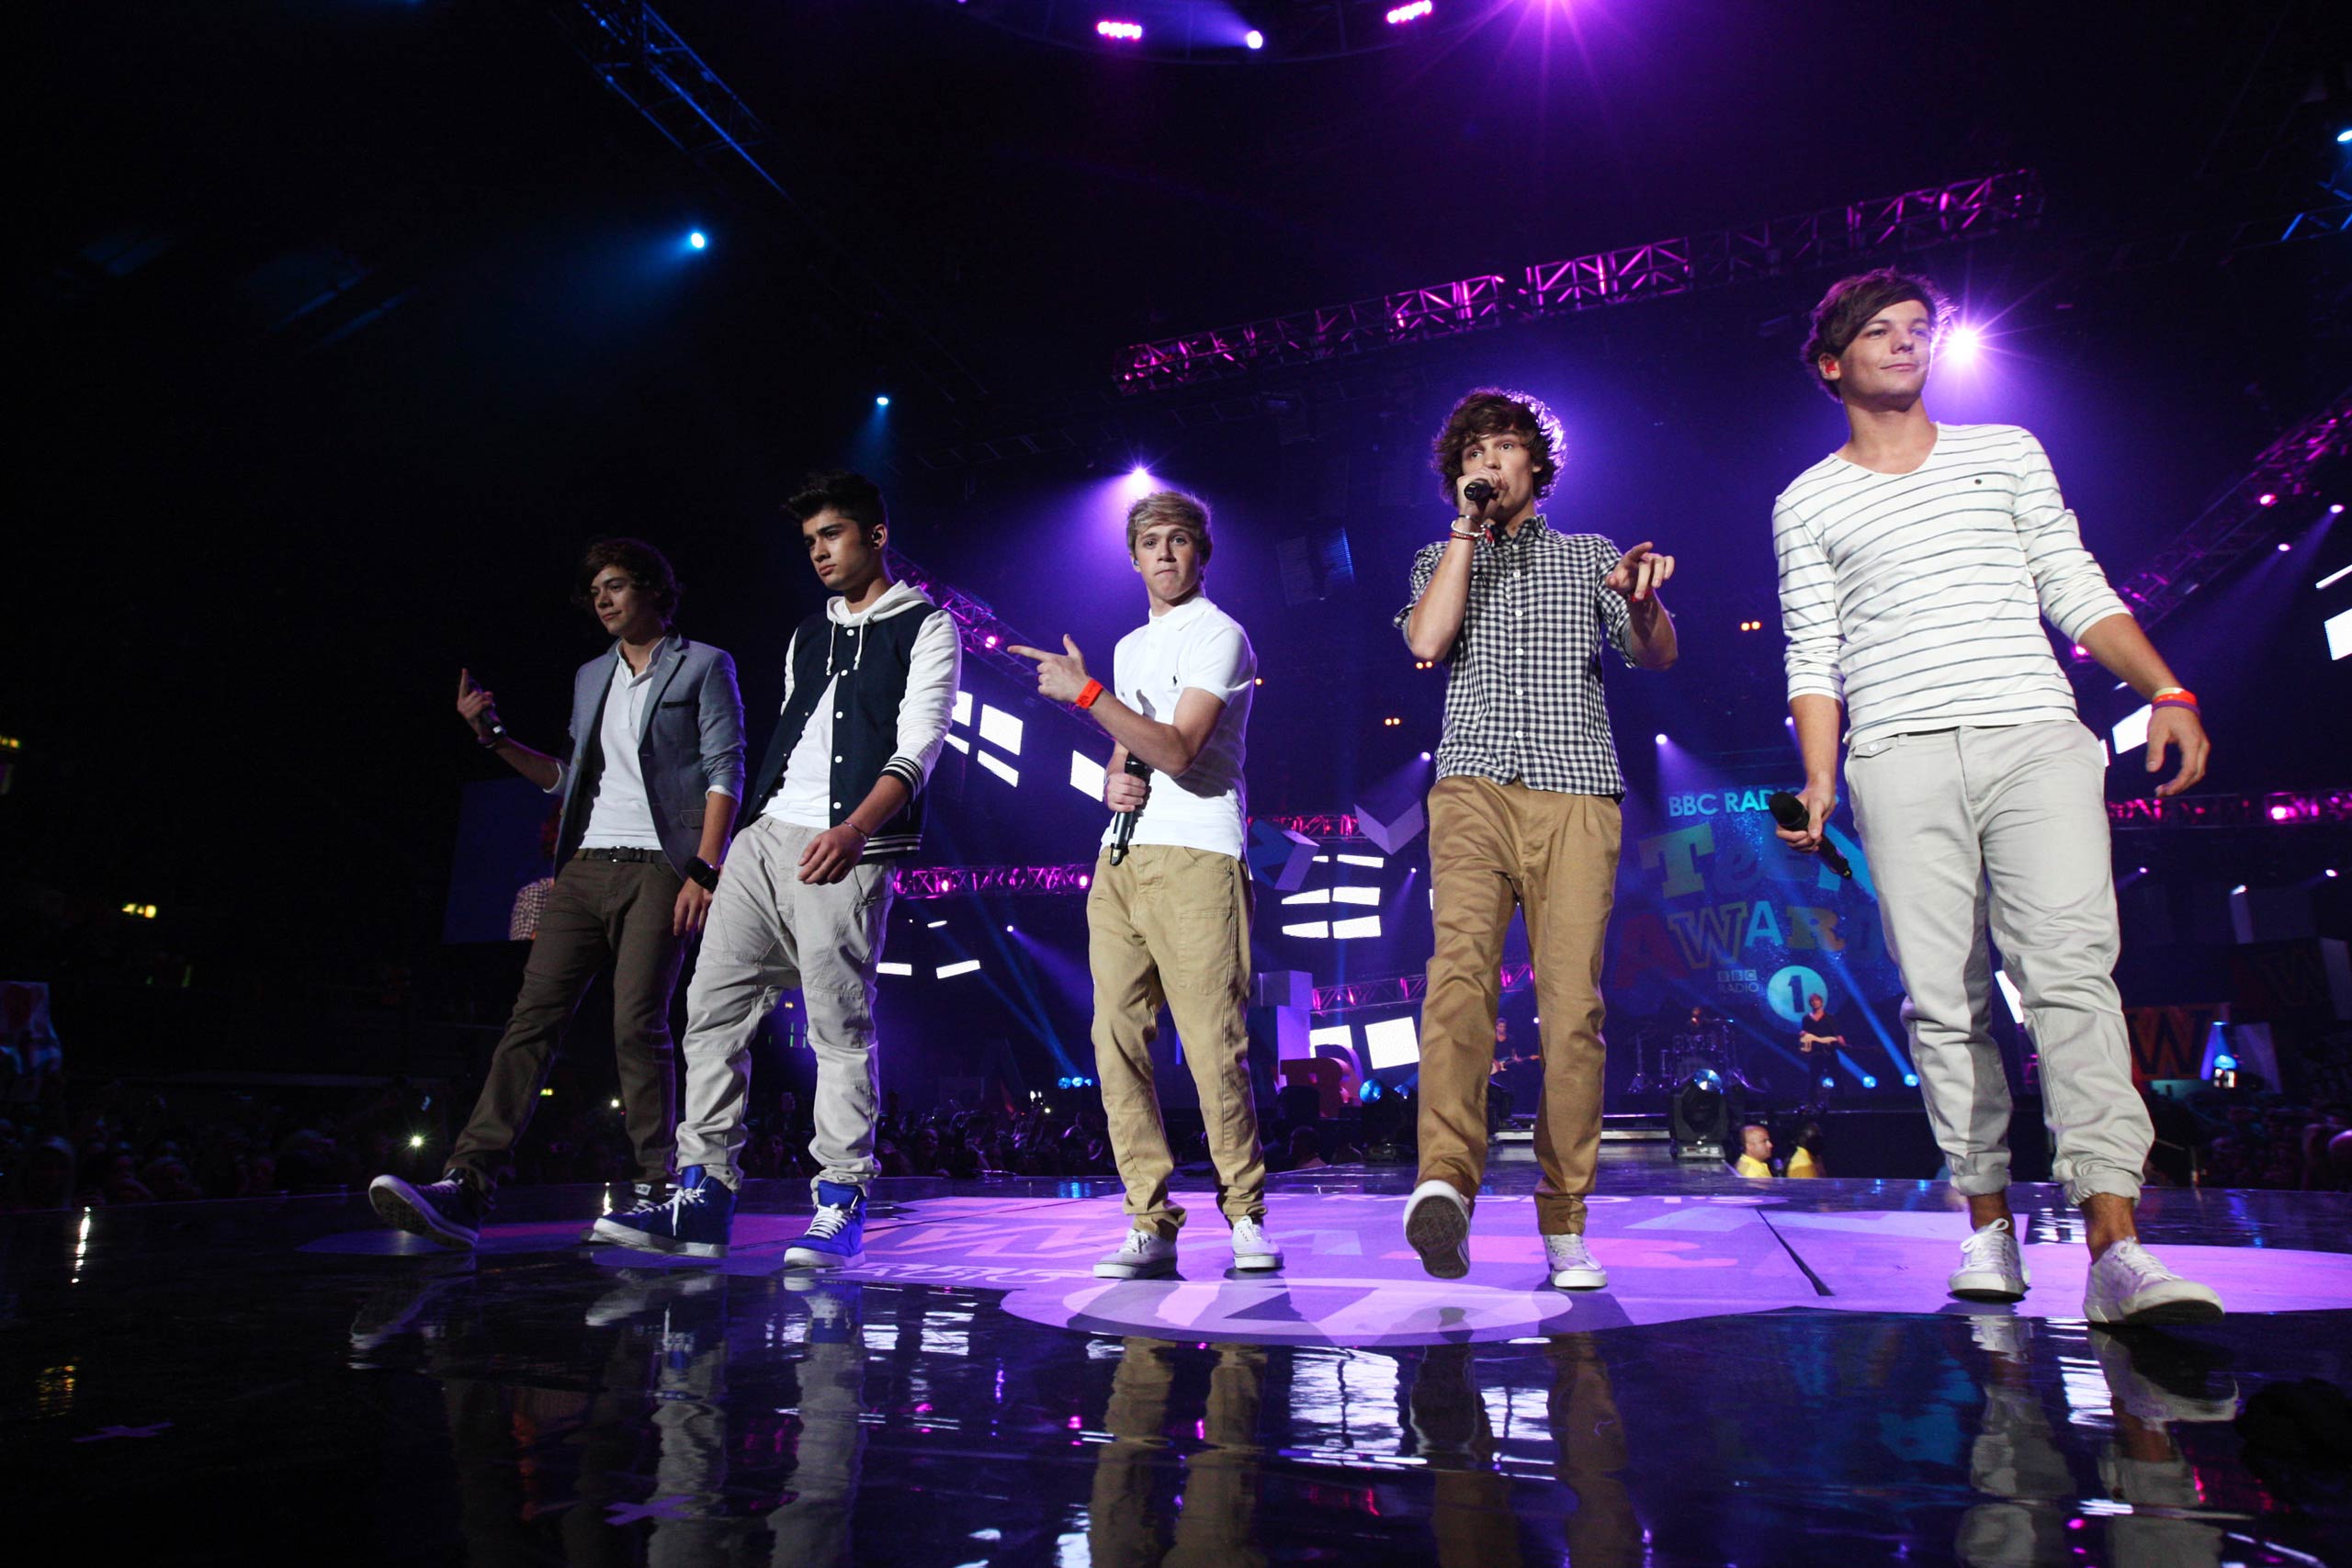 One Direction perform at the BBC Teen Awards at Wembley arena in London, United Kingdom in 2011.